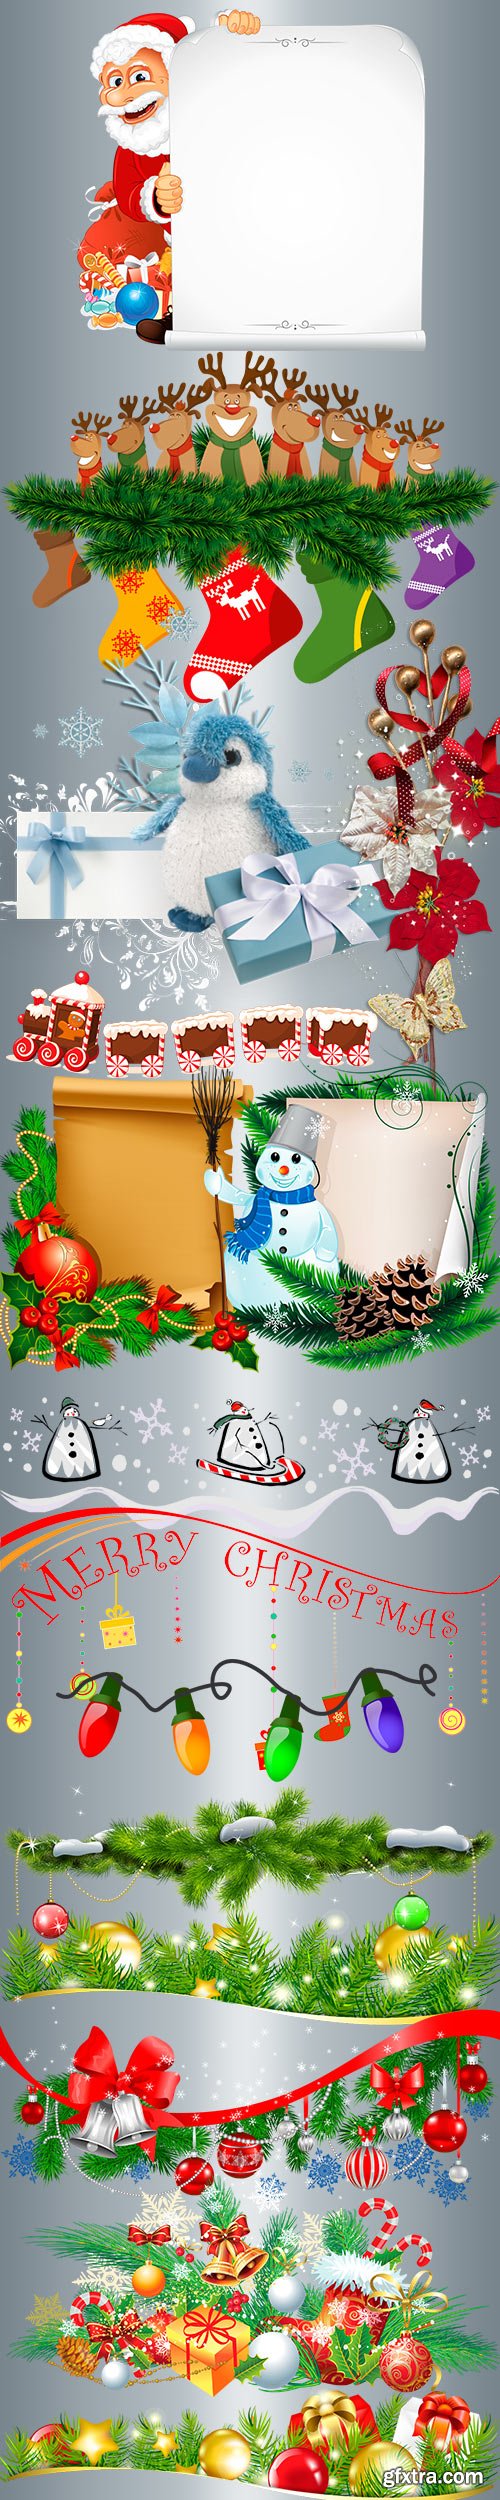 Clipart Christmas borders, dividers, corners and scrolls